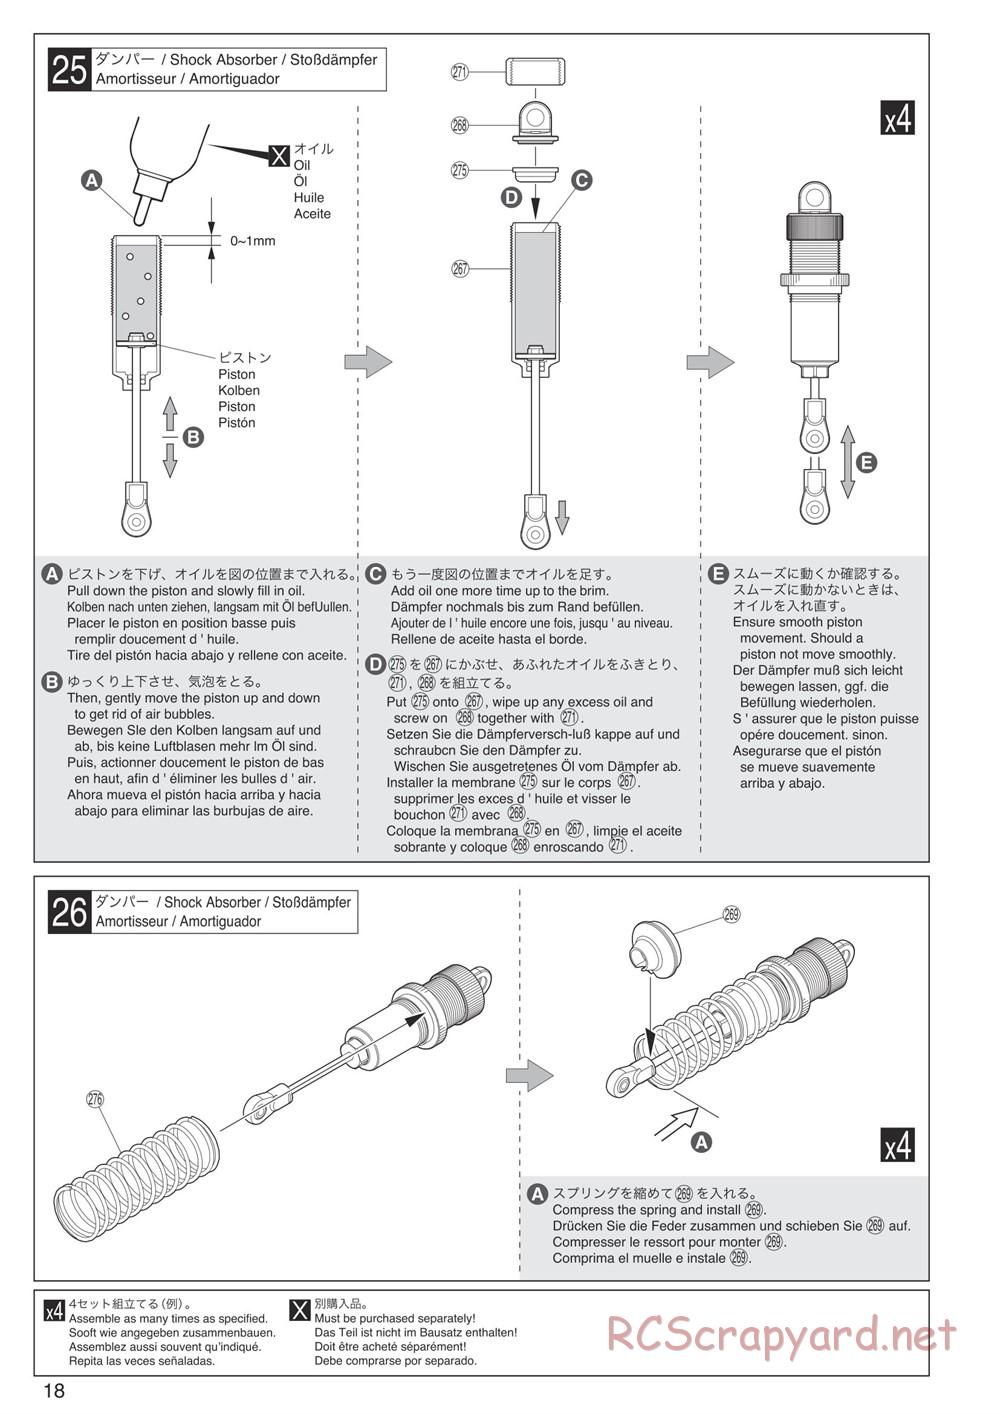 Kyosho - DMT - Manual - Page 18